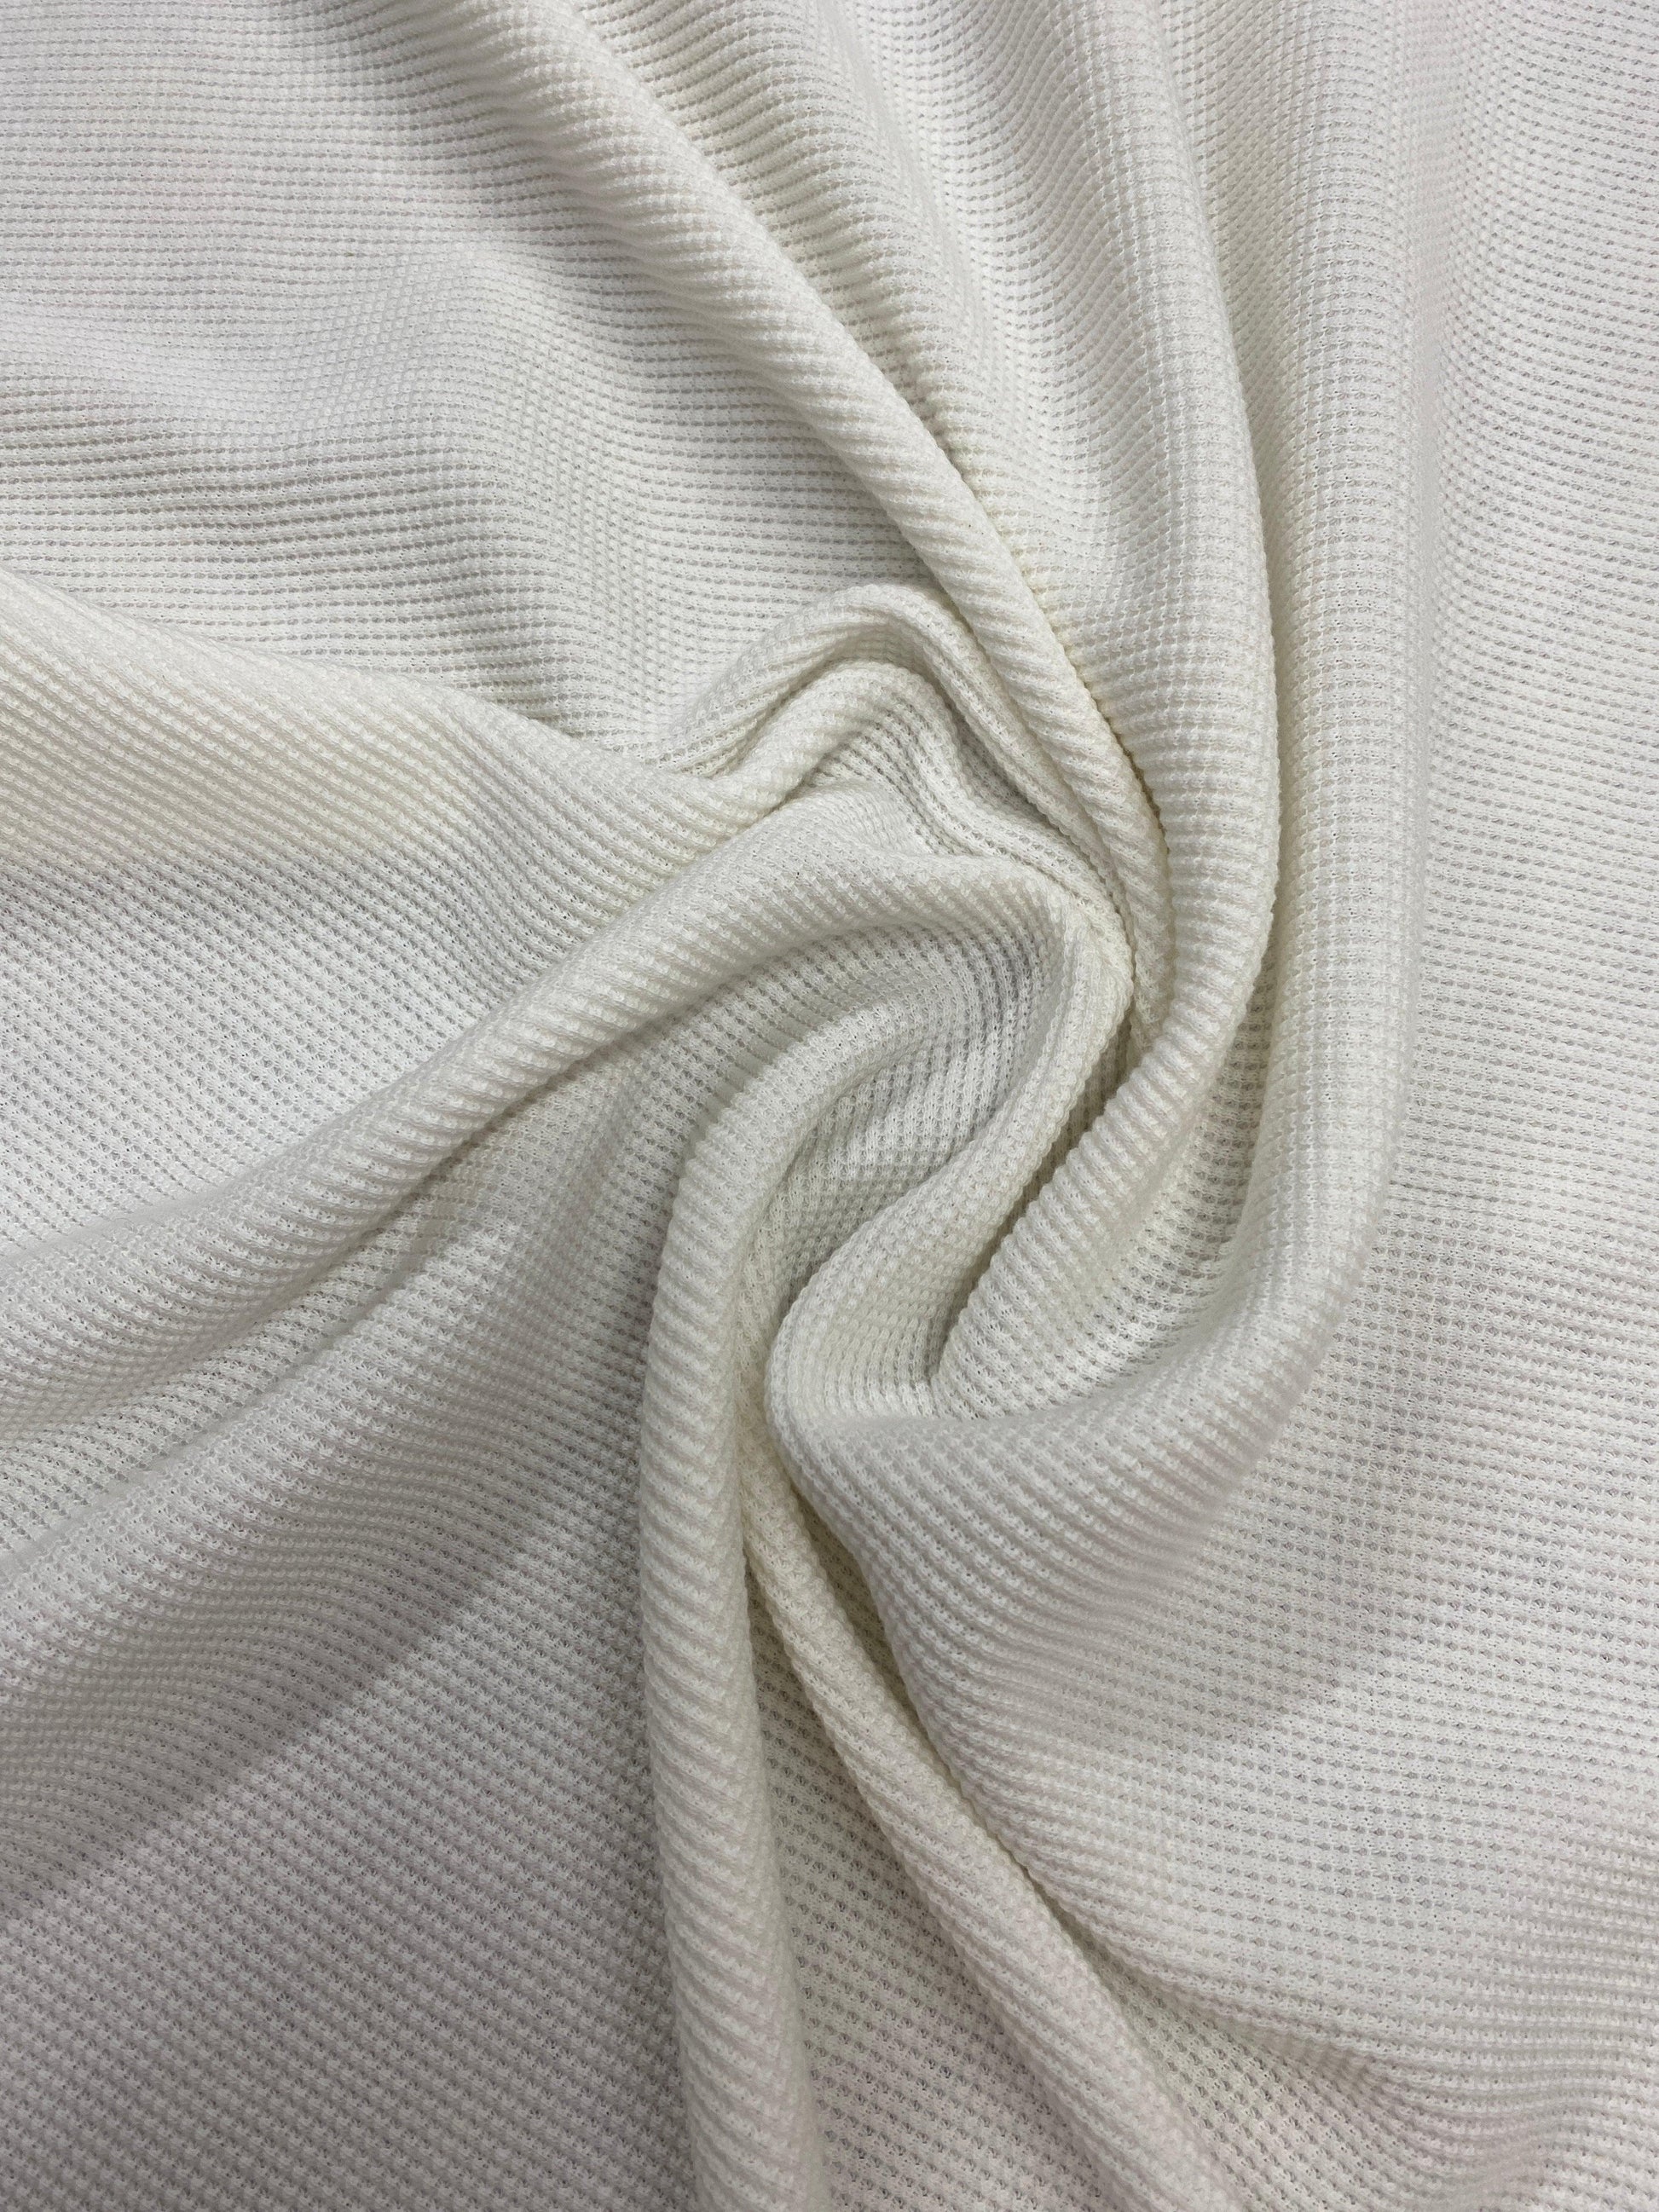 Off-White Organic Cotton Thermal Fabric- Grown in the USA - Nature's Fabrics